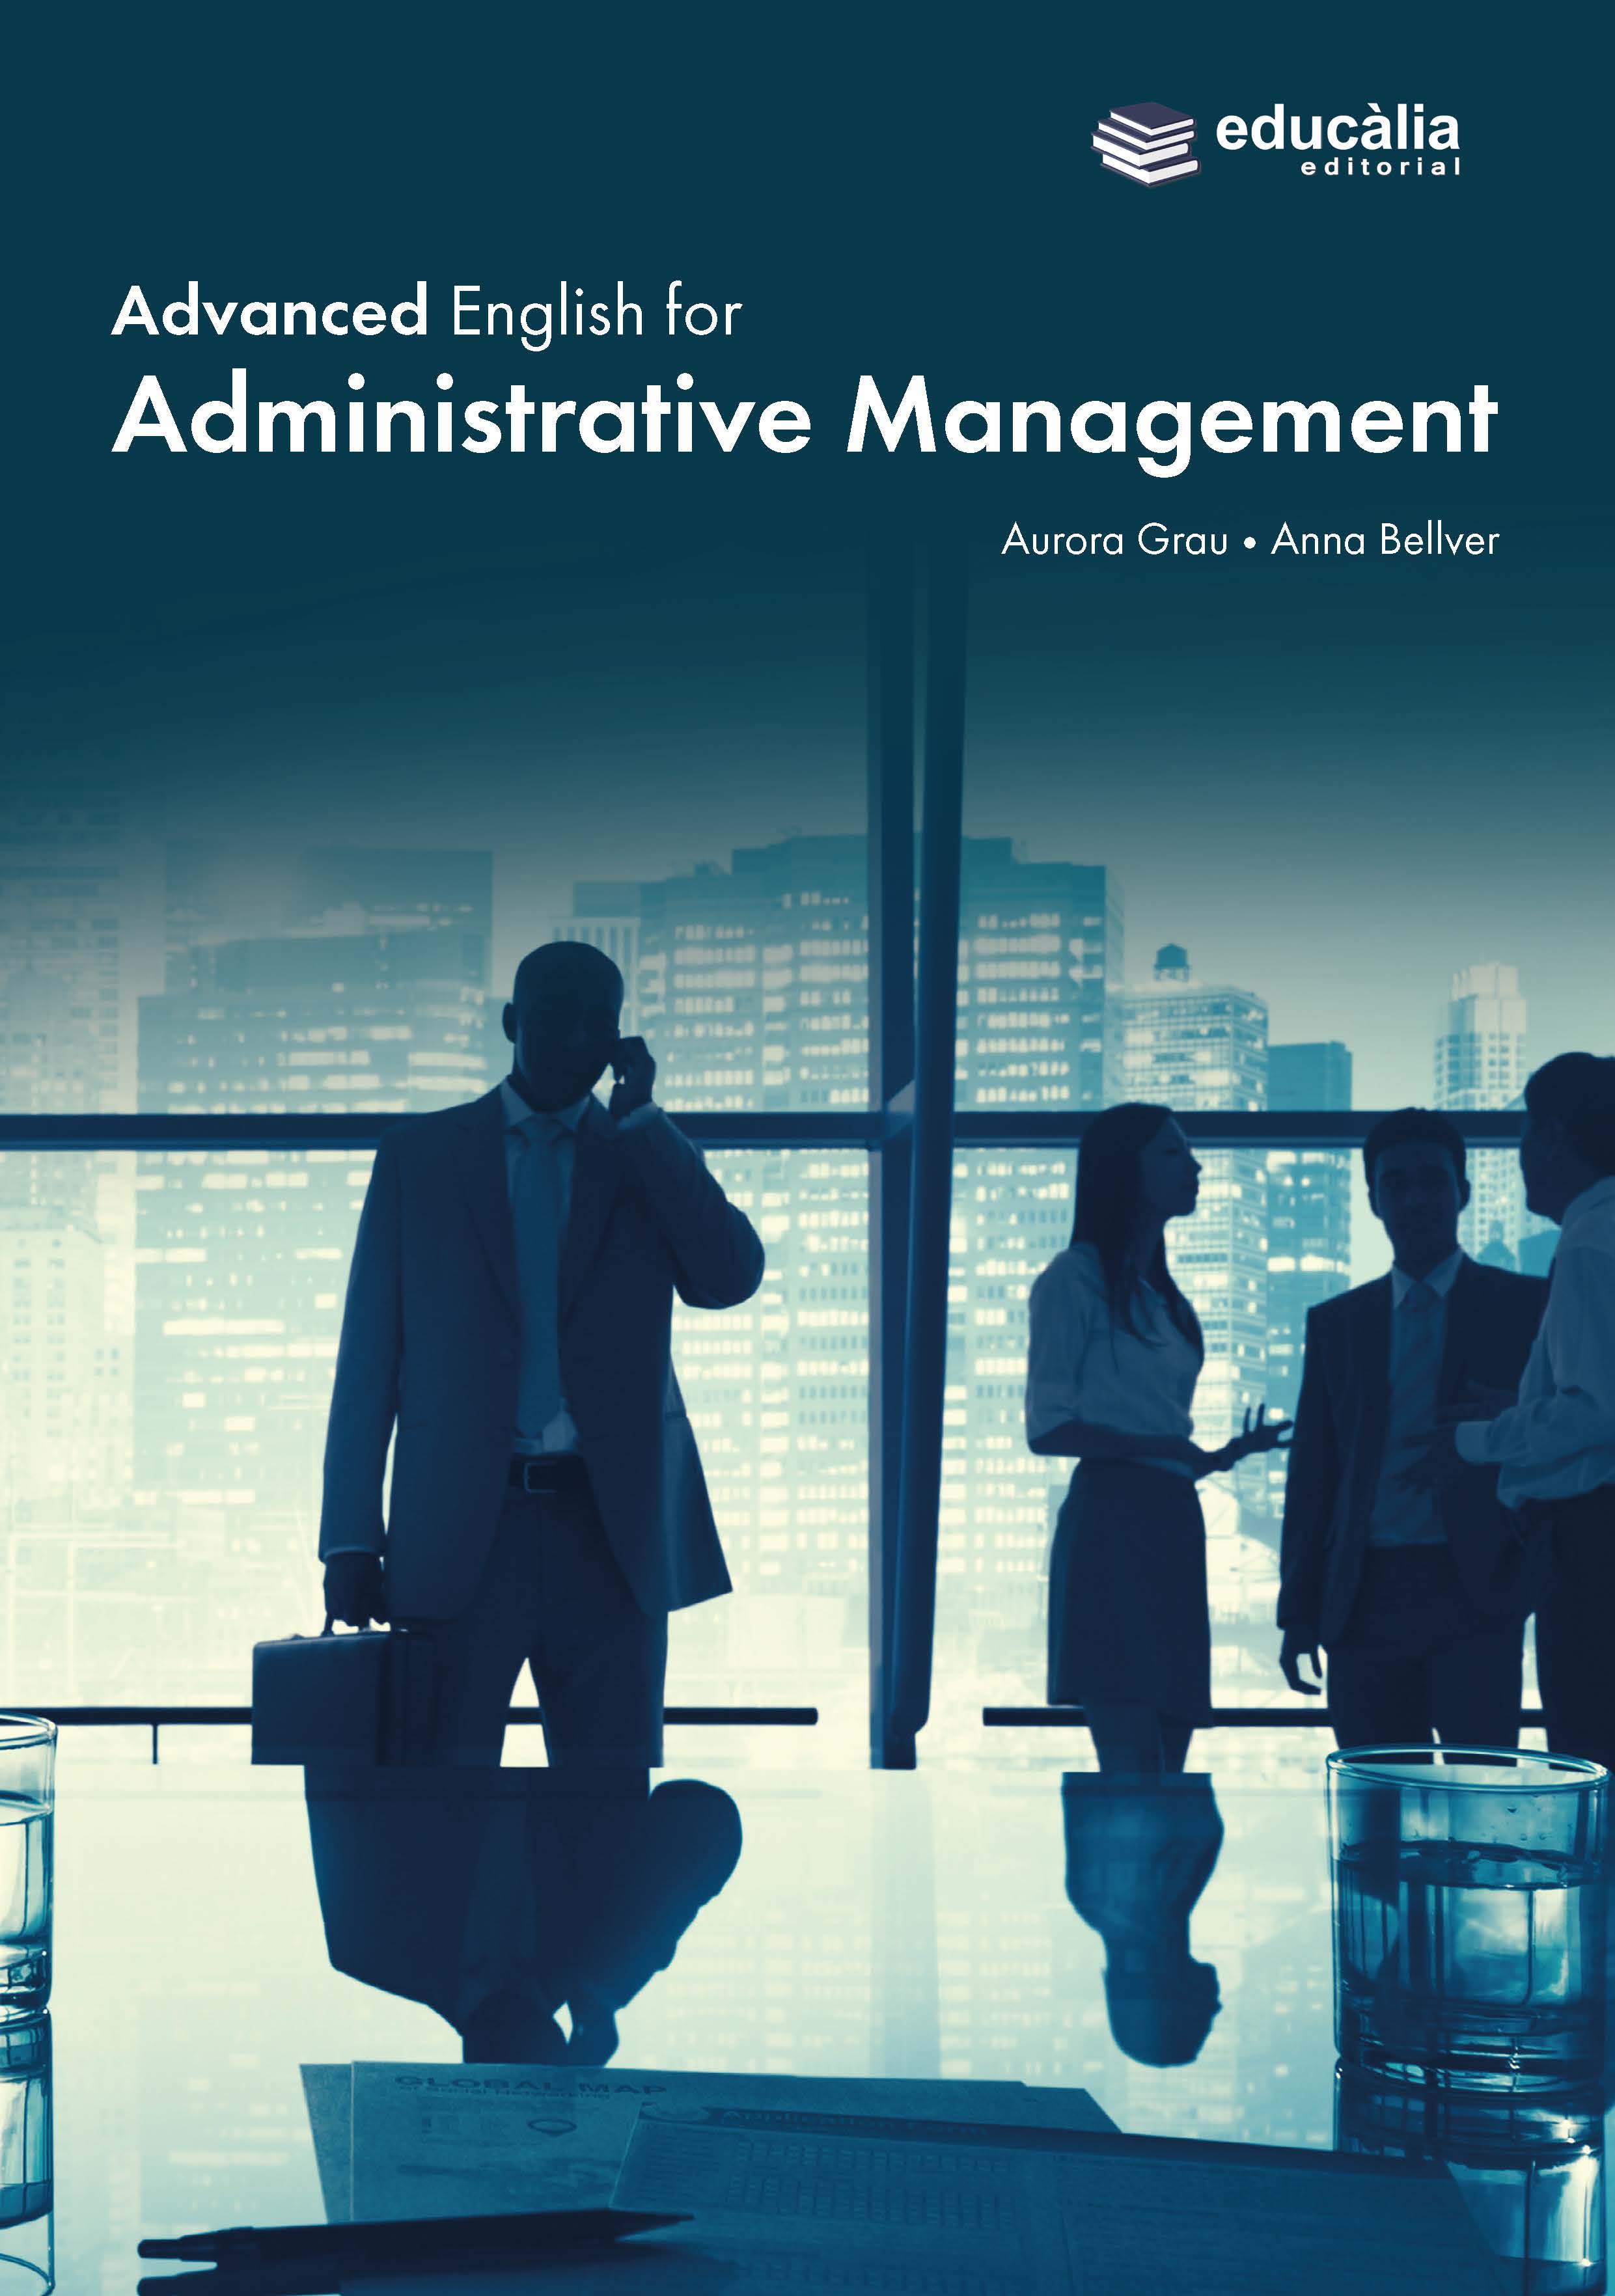 Advanced English for Administrative Management